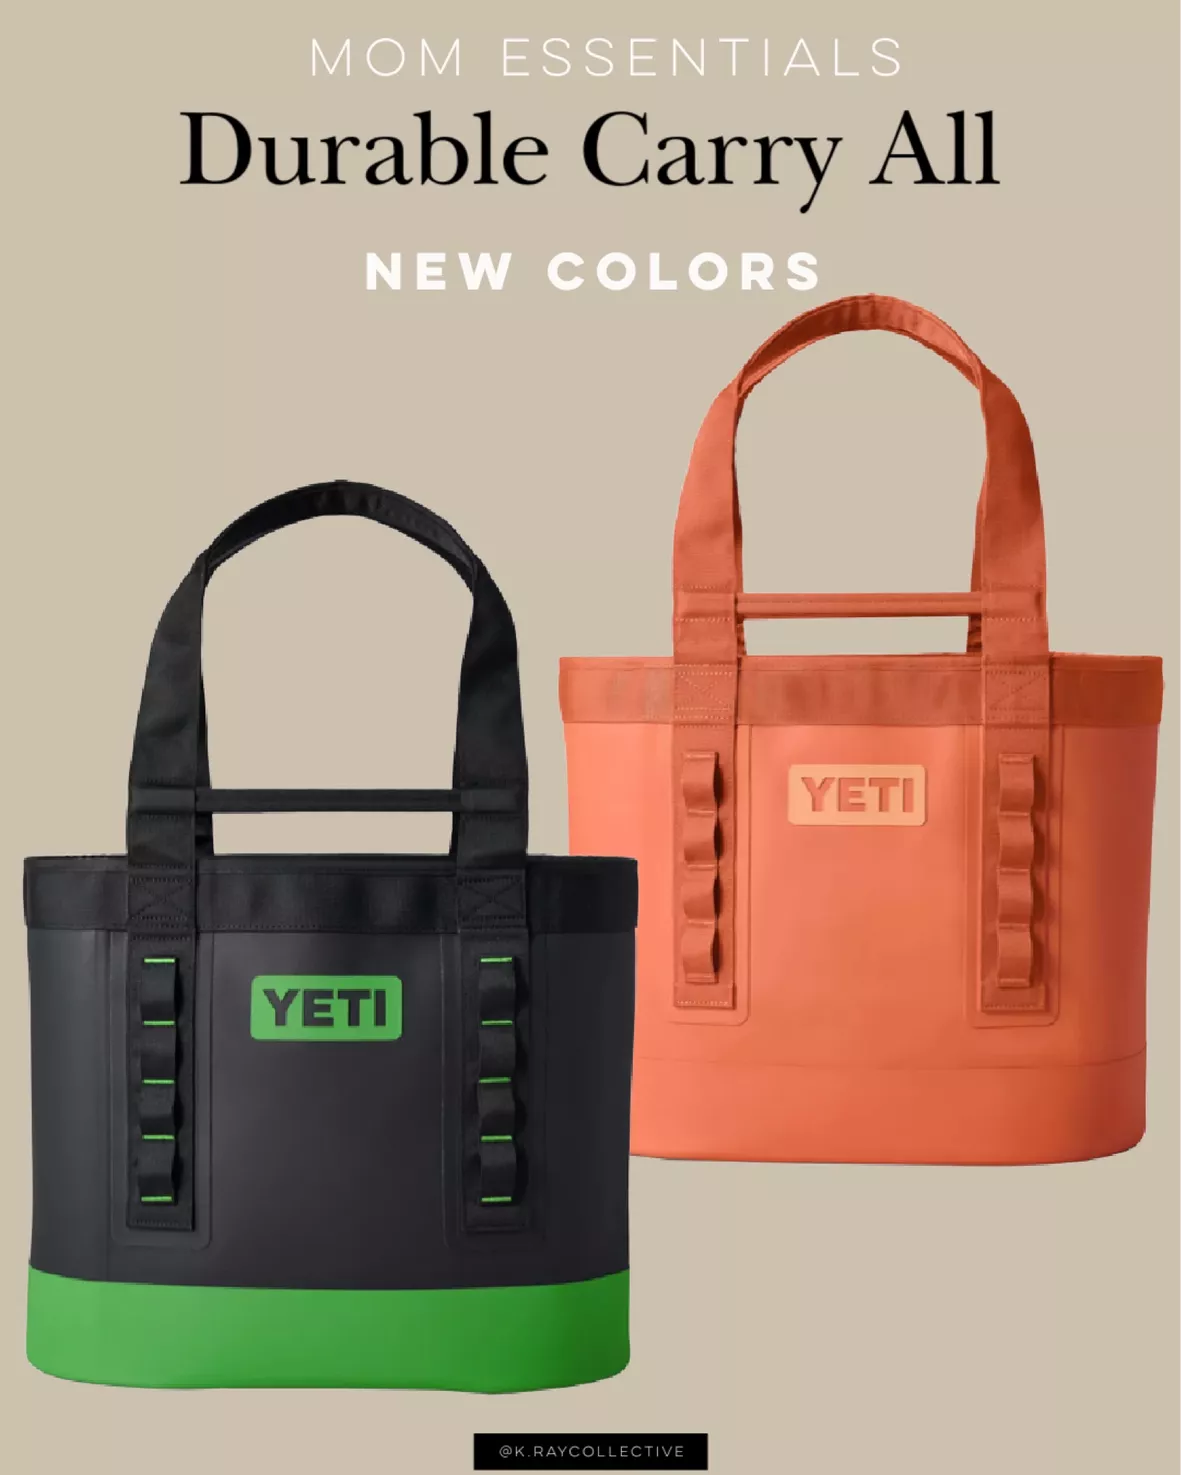 Searching for Yeti Carryall Dupe. Love the one I have but need